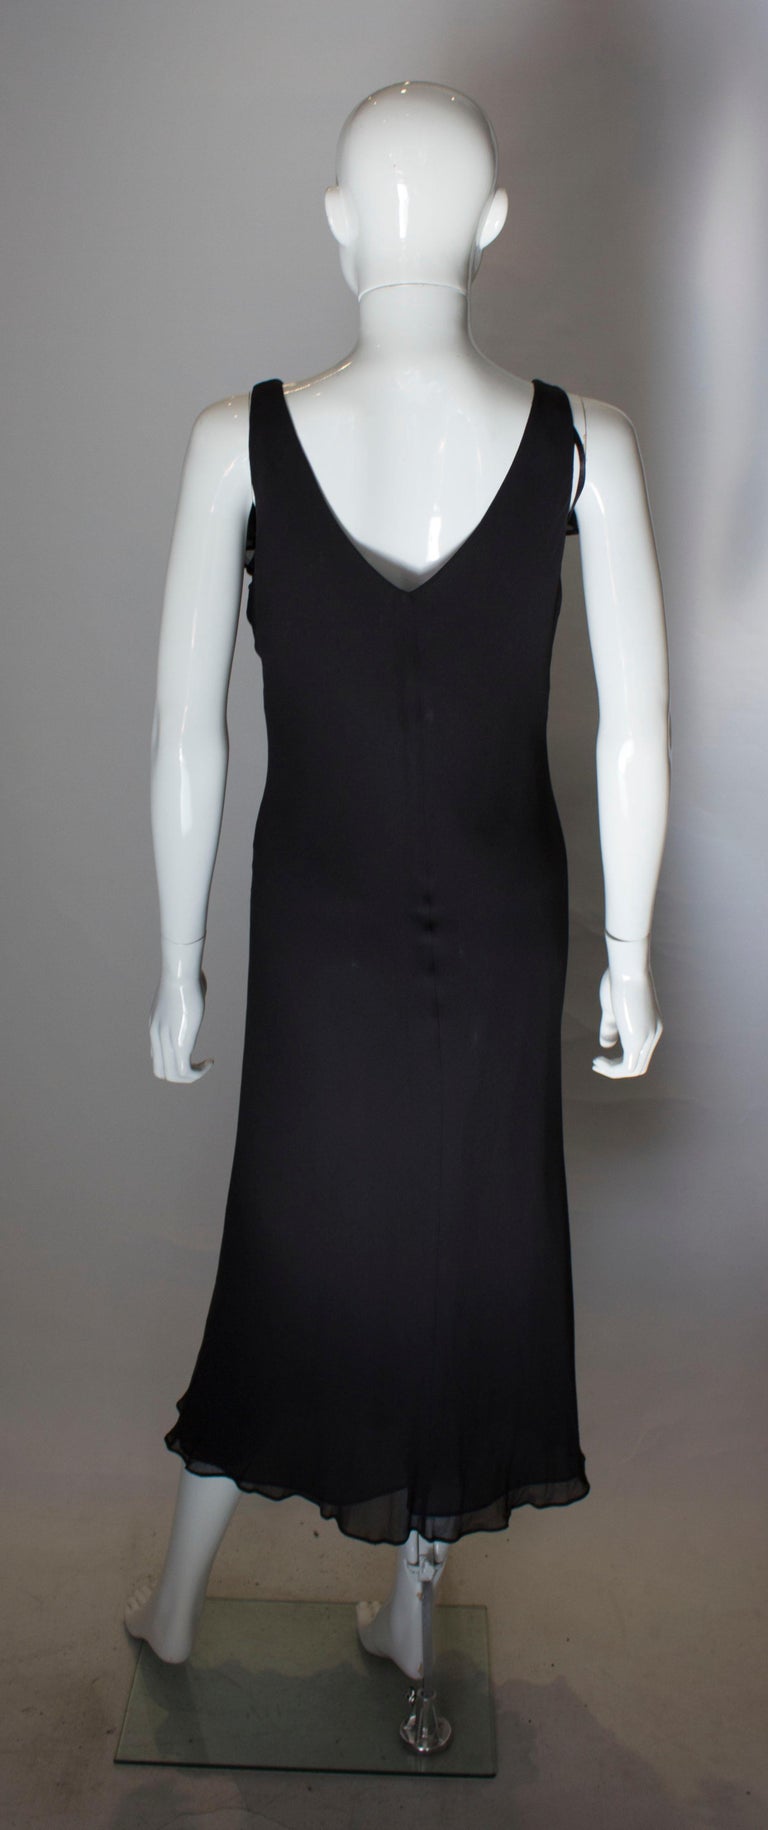 Vintage Slip Dress with Ruffle at Neckline For Sale at 1stDibs